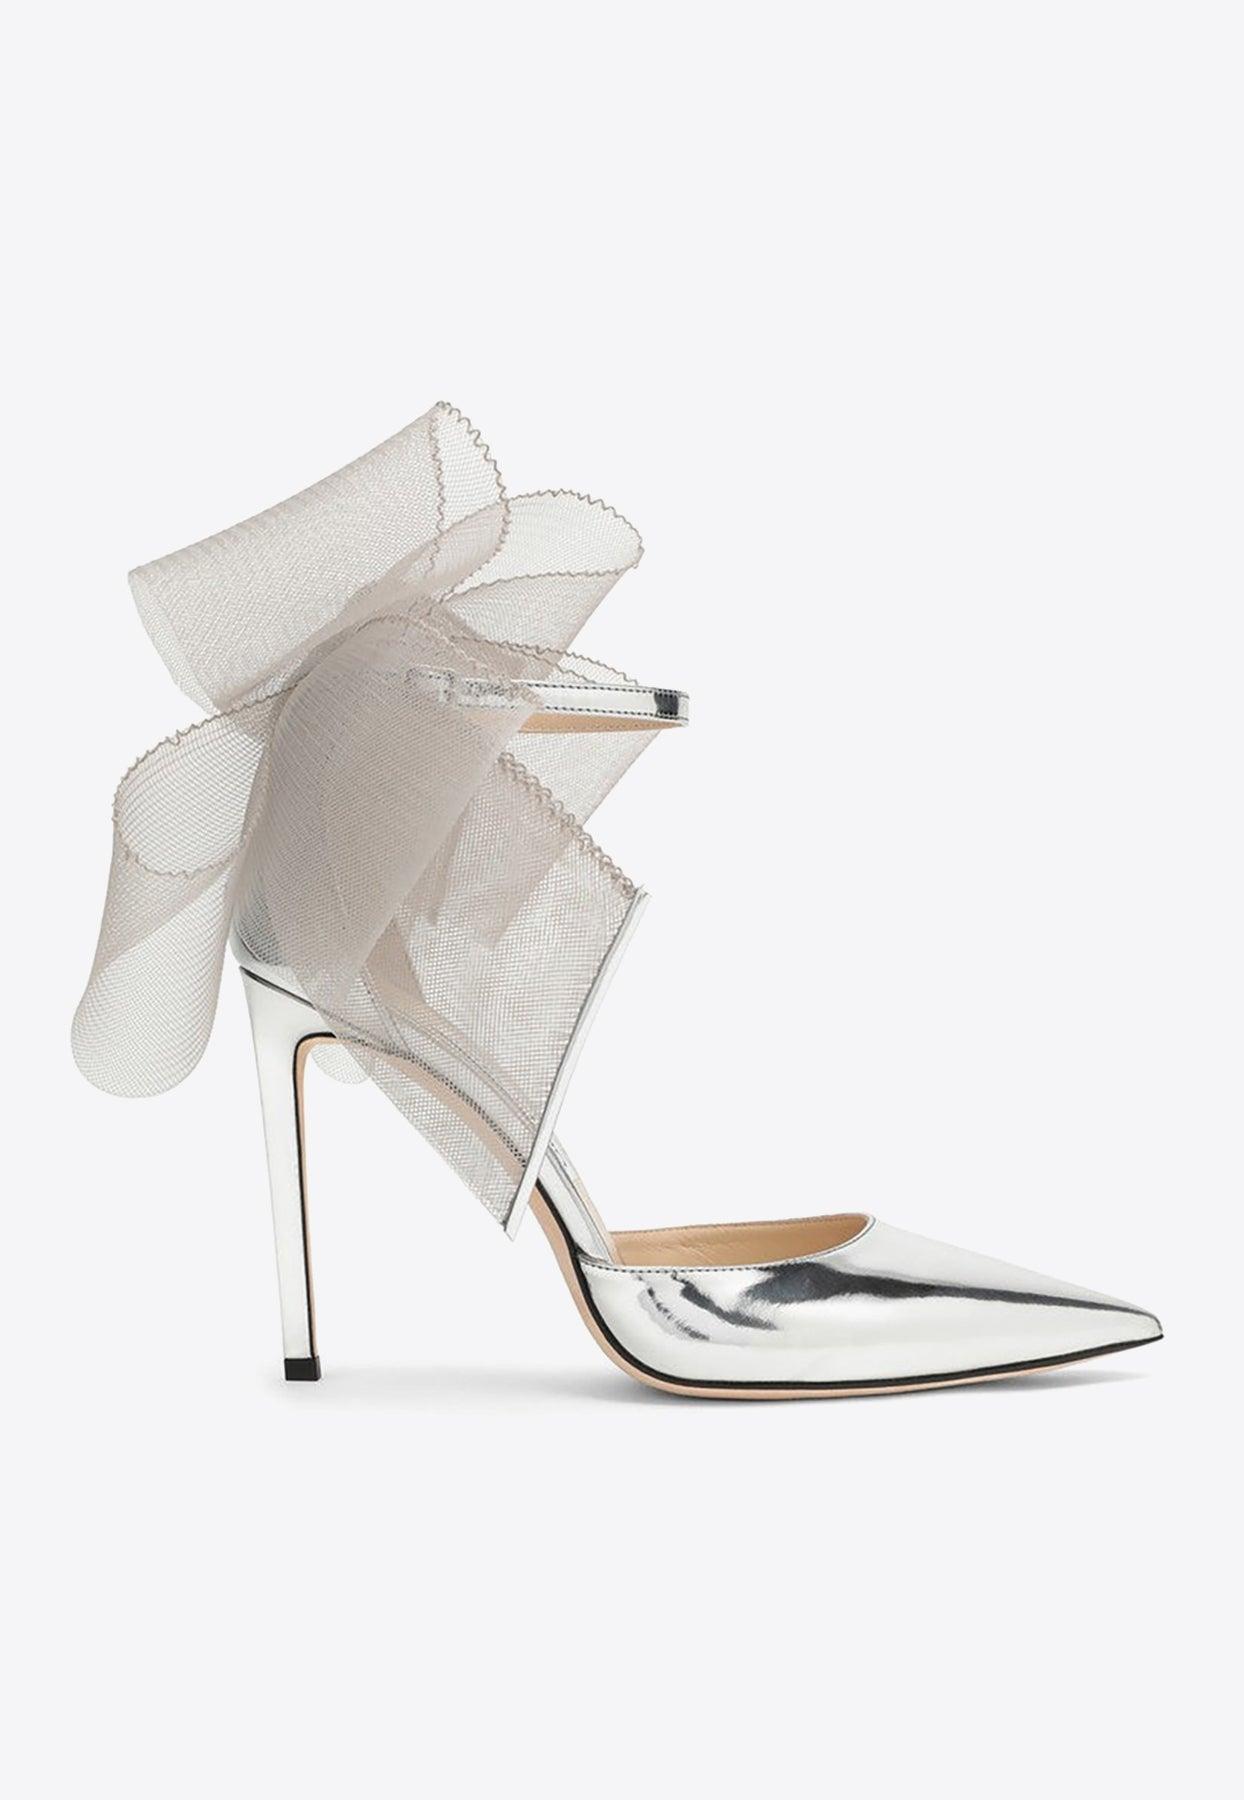 Jimmy Choo Averly 100 Tulle Bow Pumps in White | Lyst